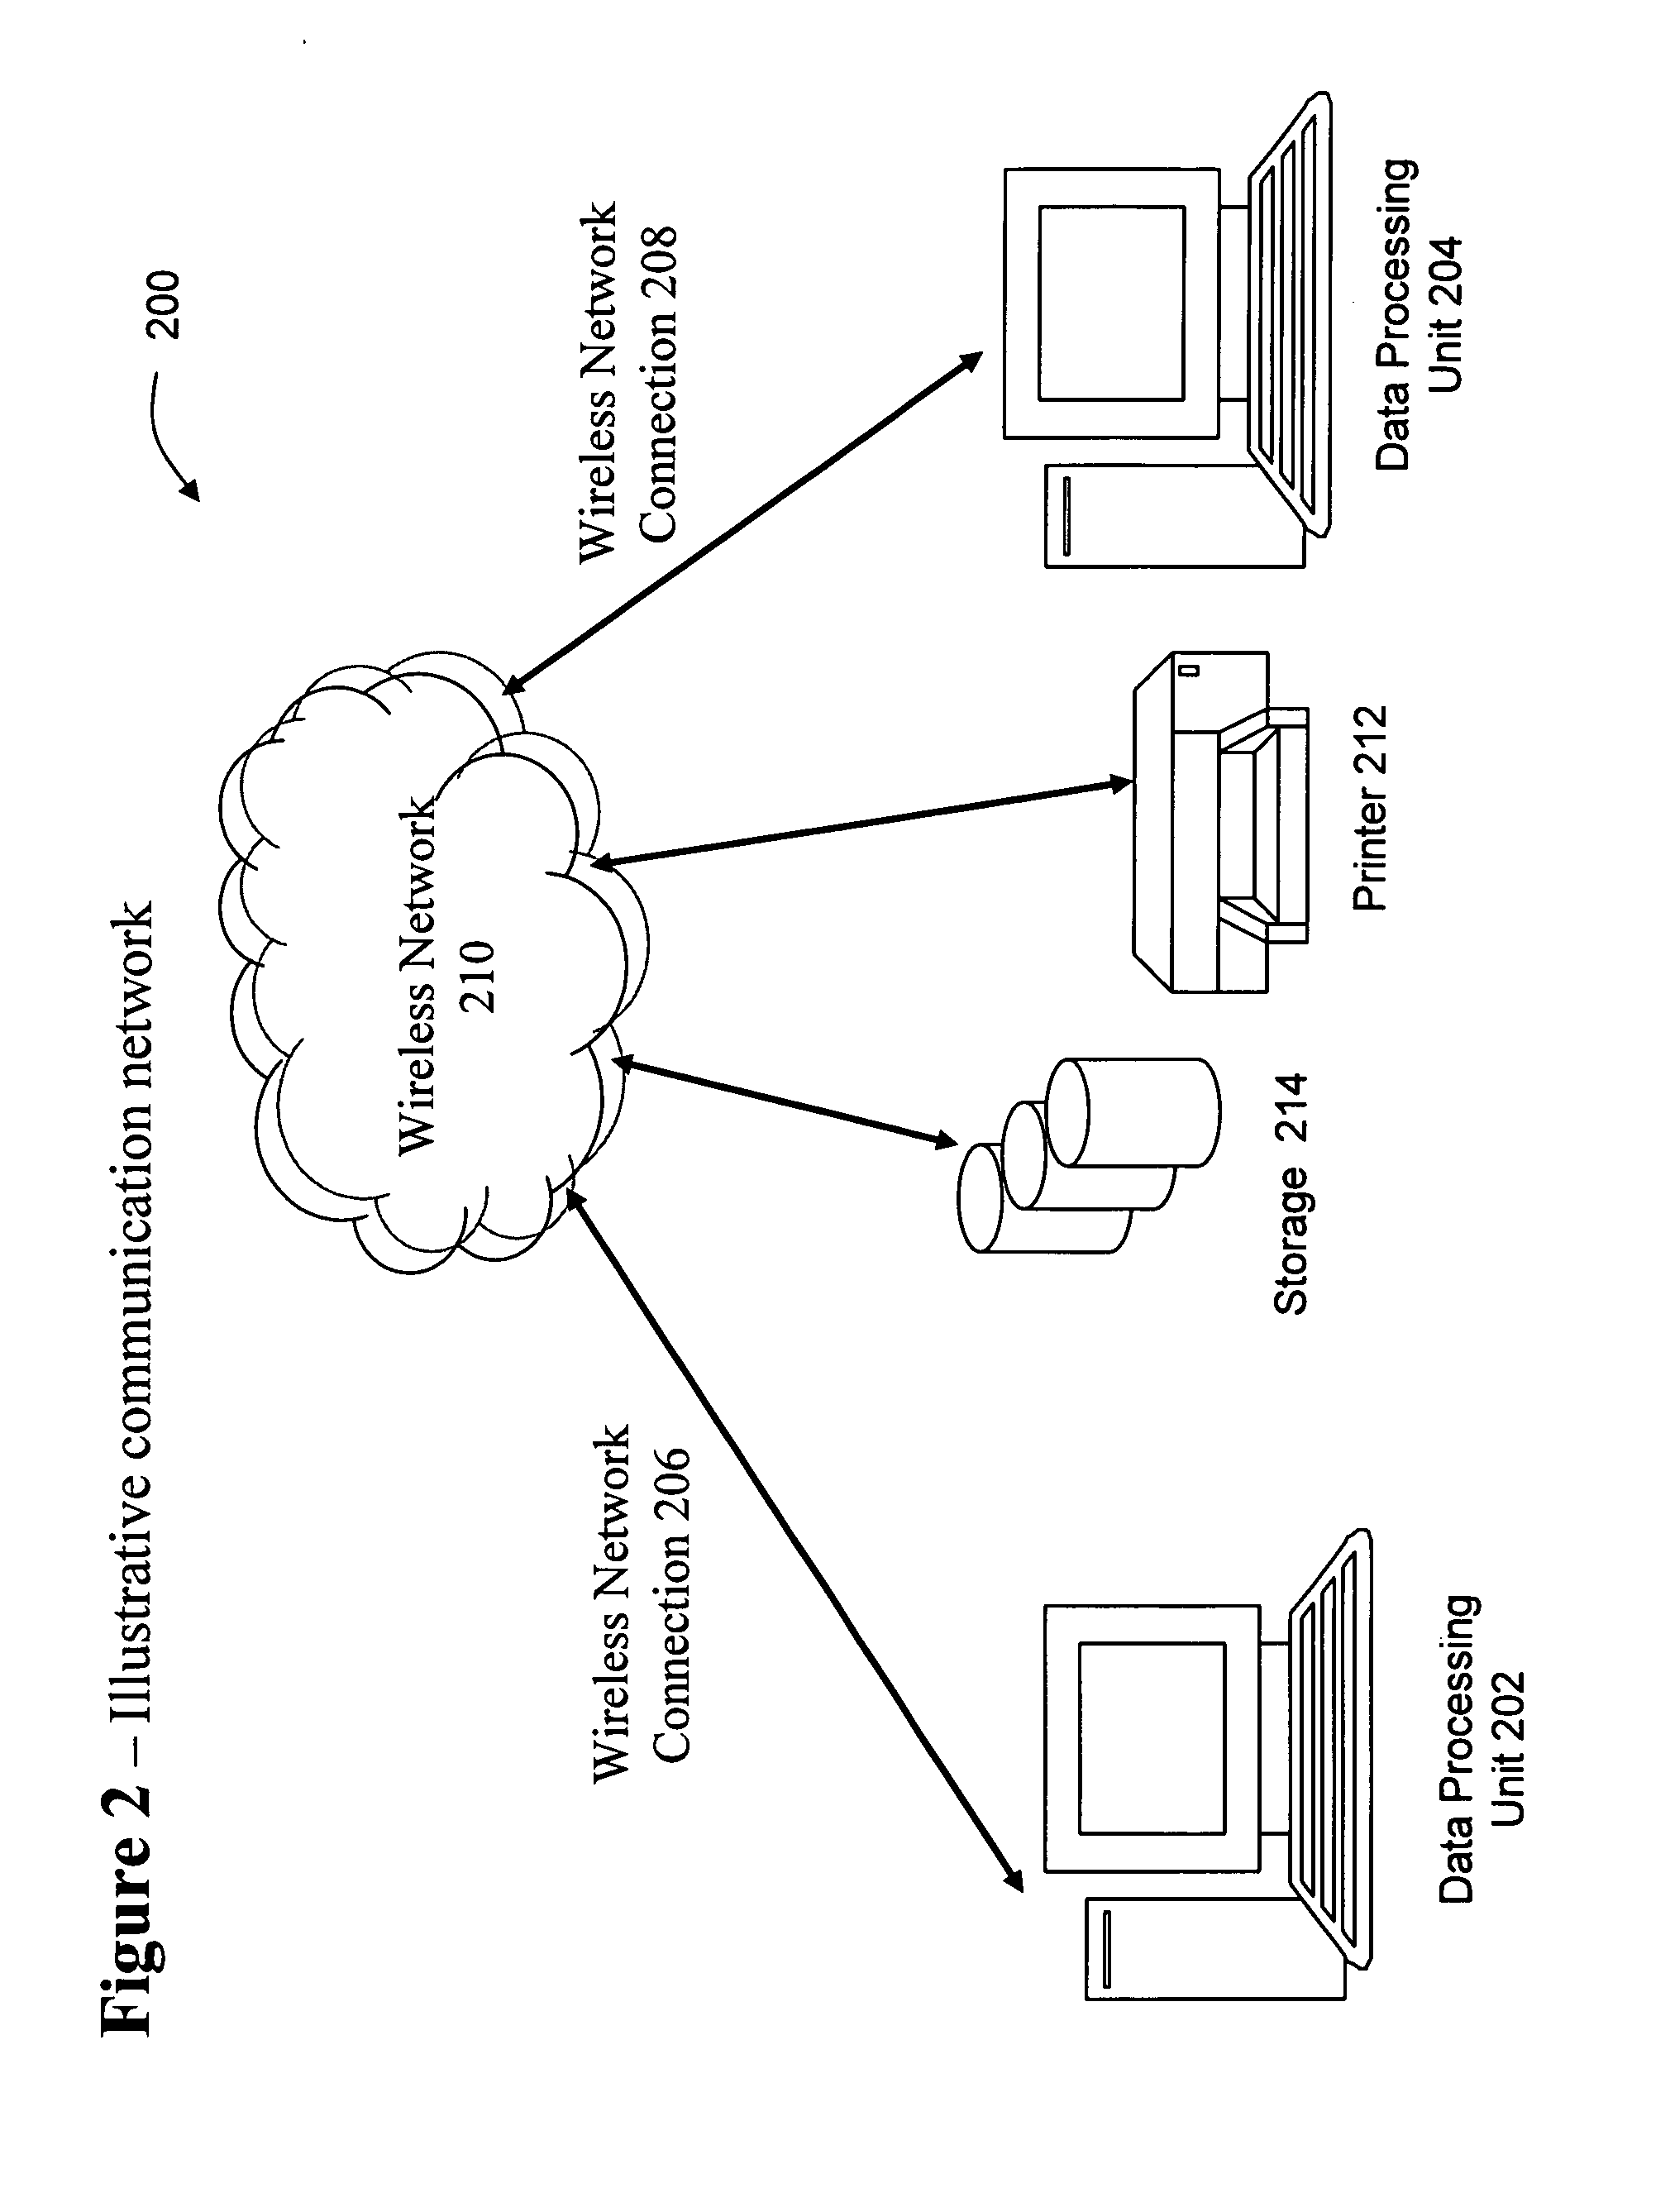 Sdram-based tcam emulator for implementing multiway branch capabilities in an XML processor